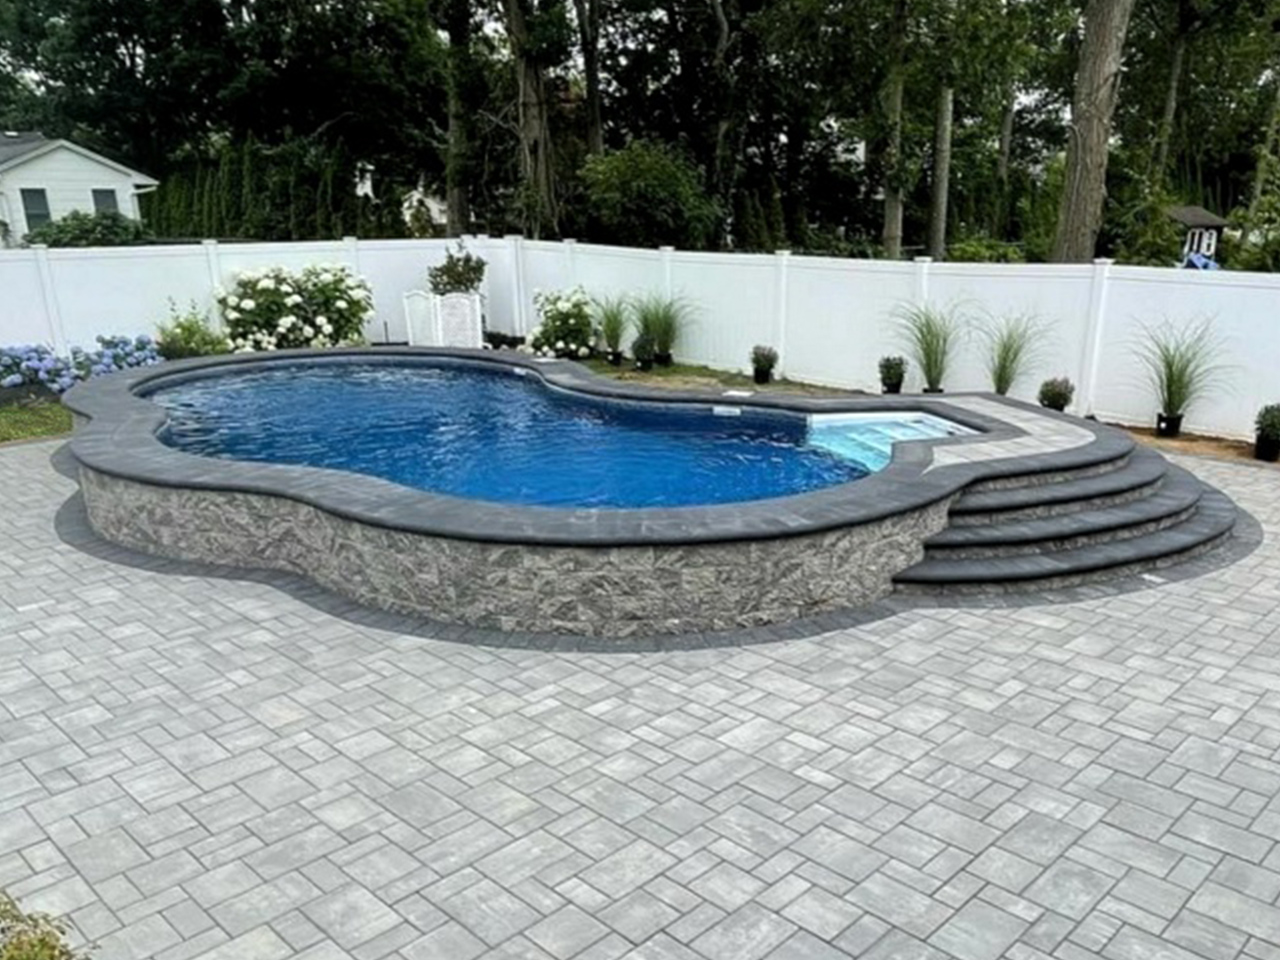 Create lasting memories in a picturesque poolside setting